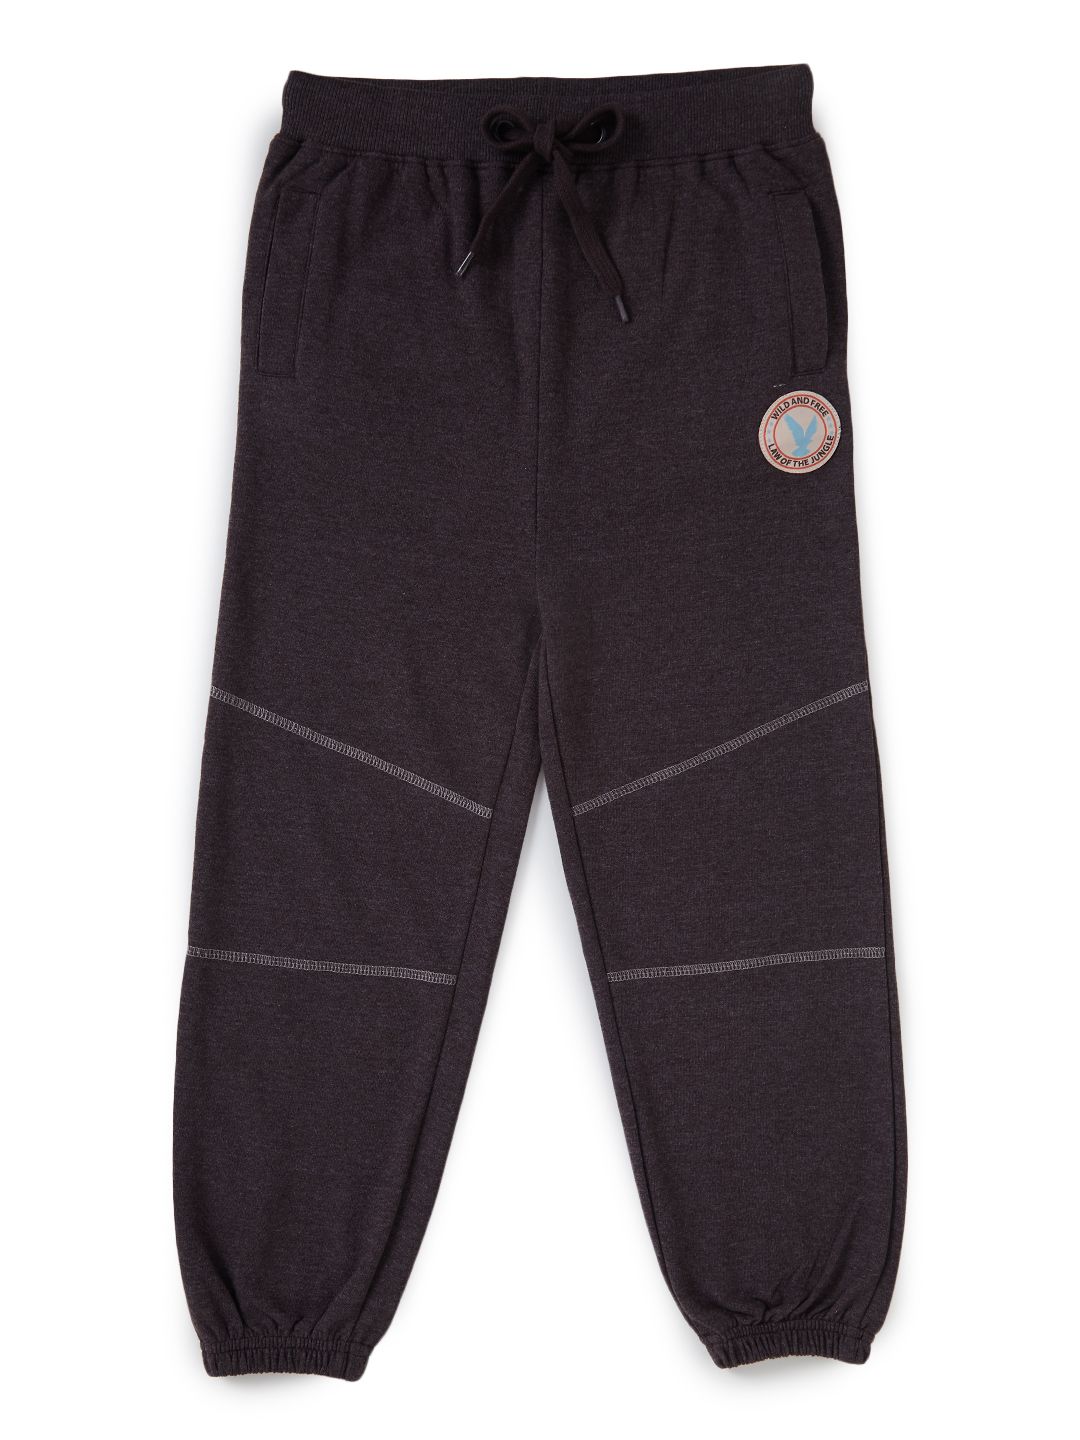 Boys Cotton Track Pant (Brown , 4-12 years)